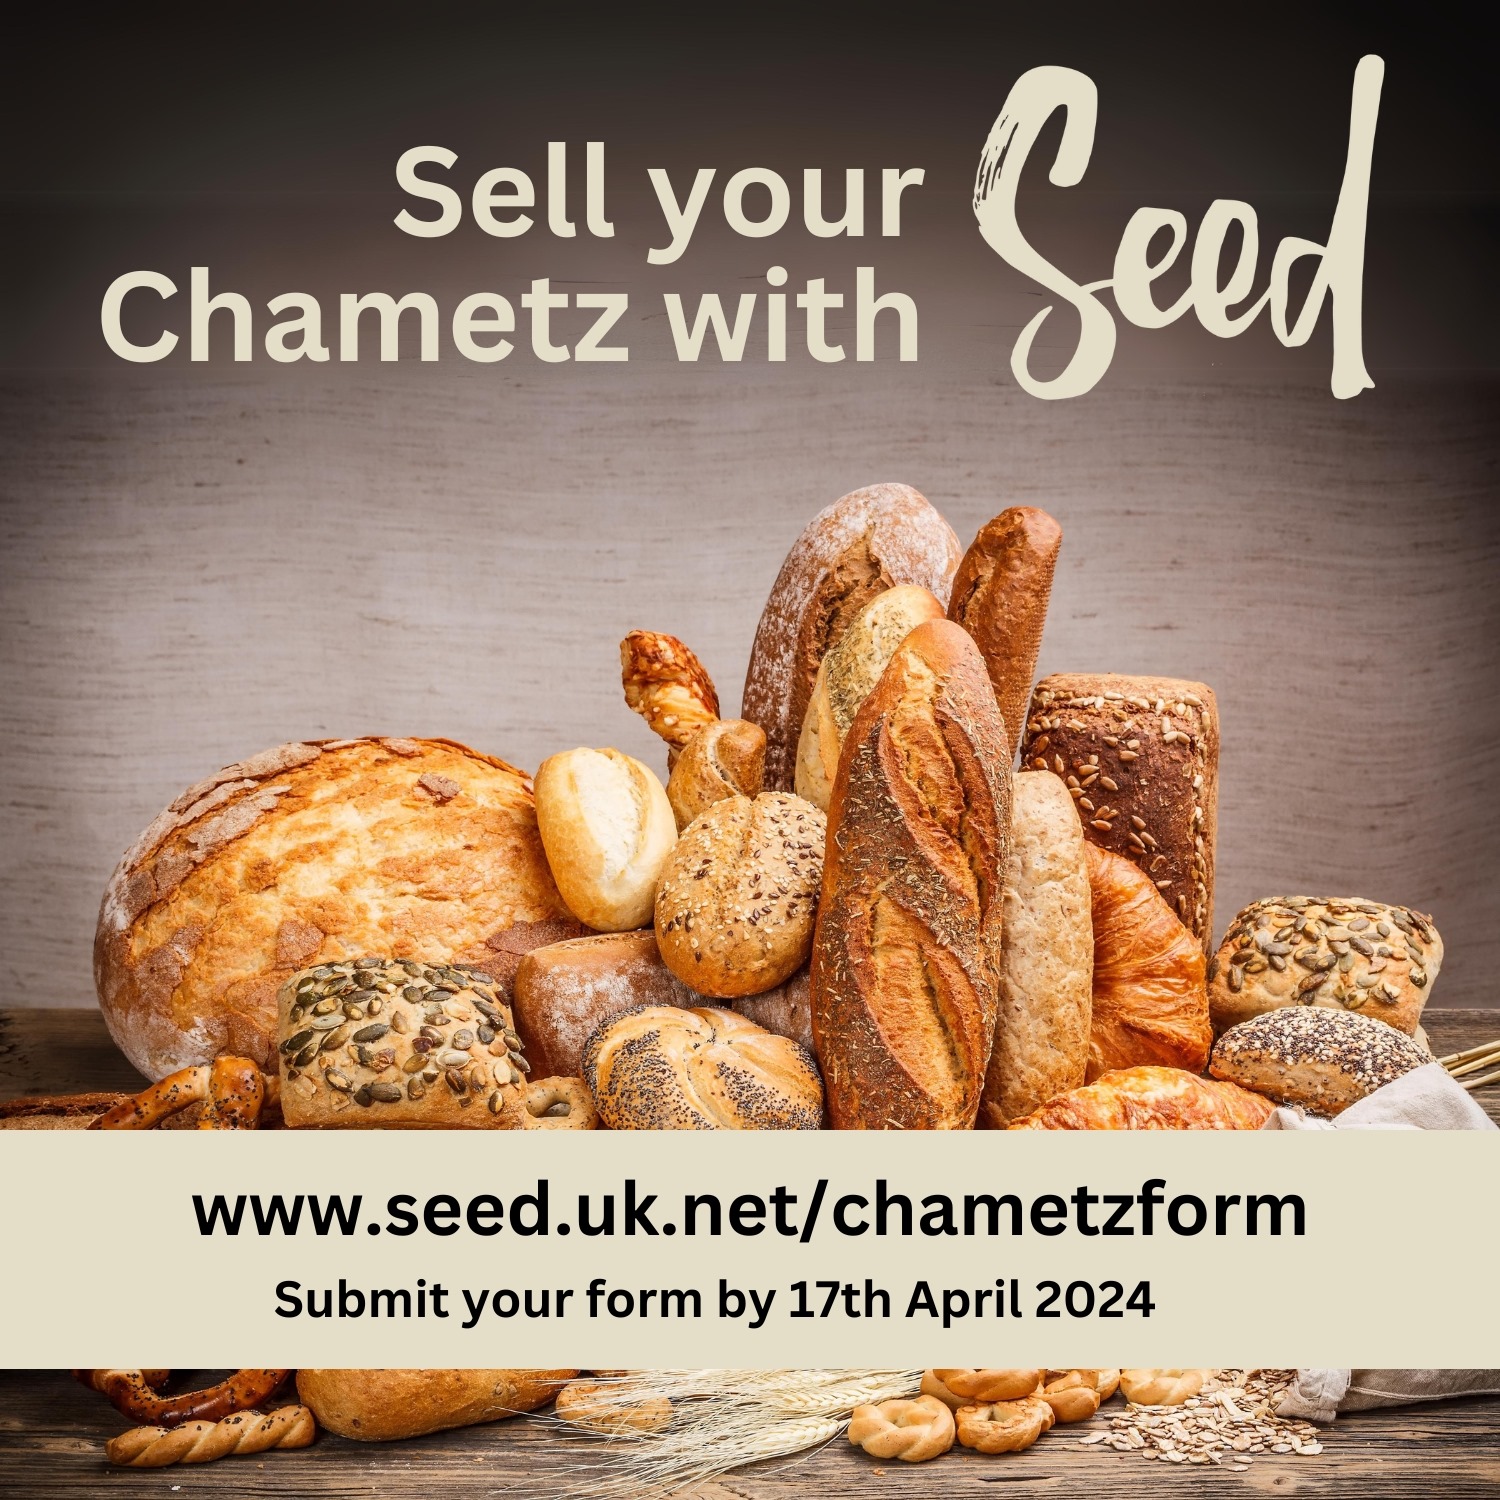 You are currently viewing Sell your Chametz with Seed